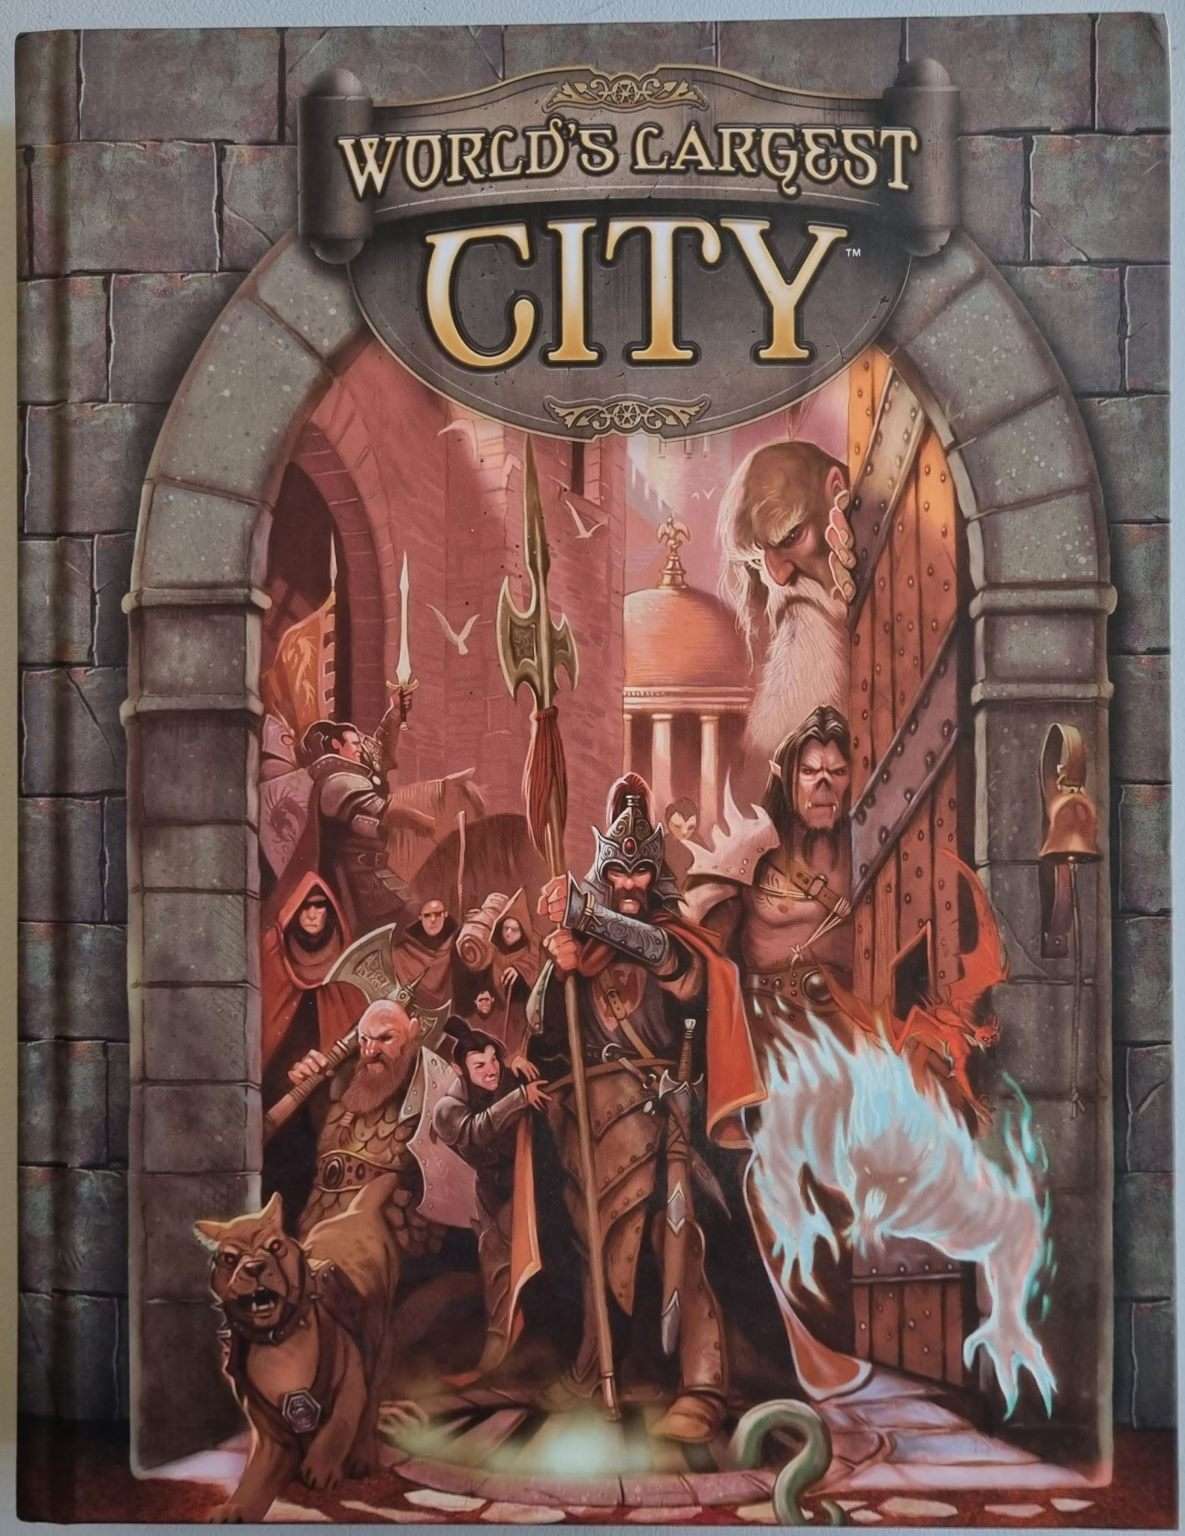 World's Largest City - Dungeons and Dragons 704 page Hardcover